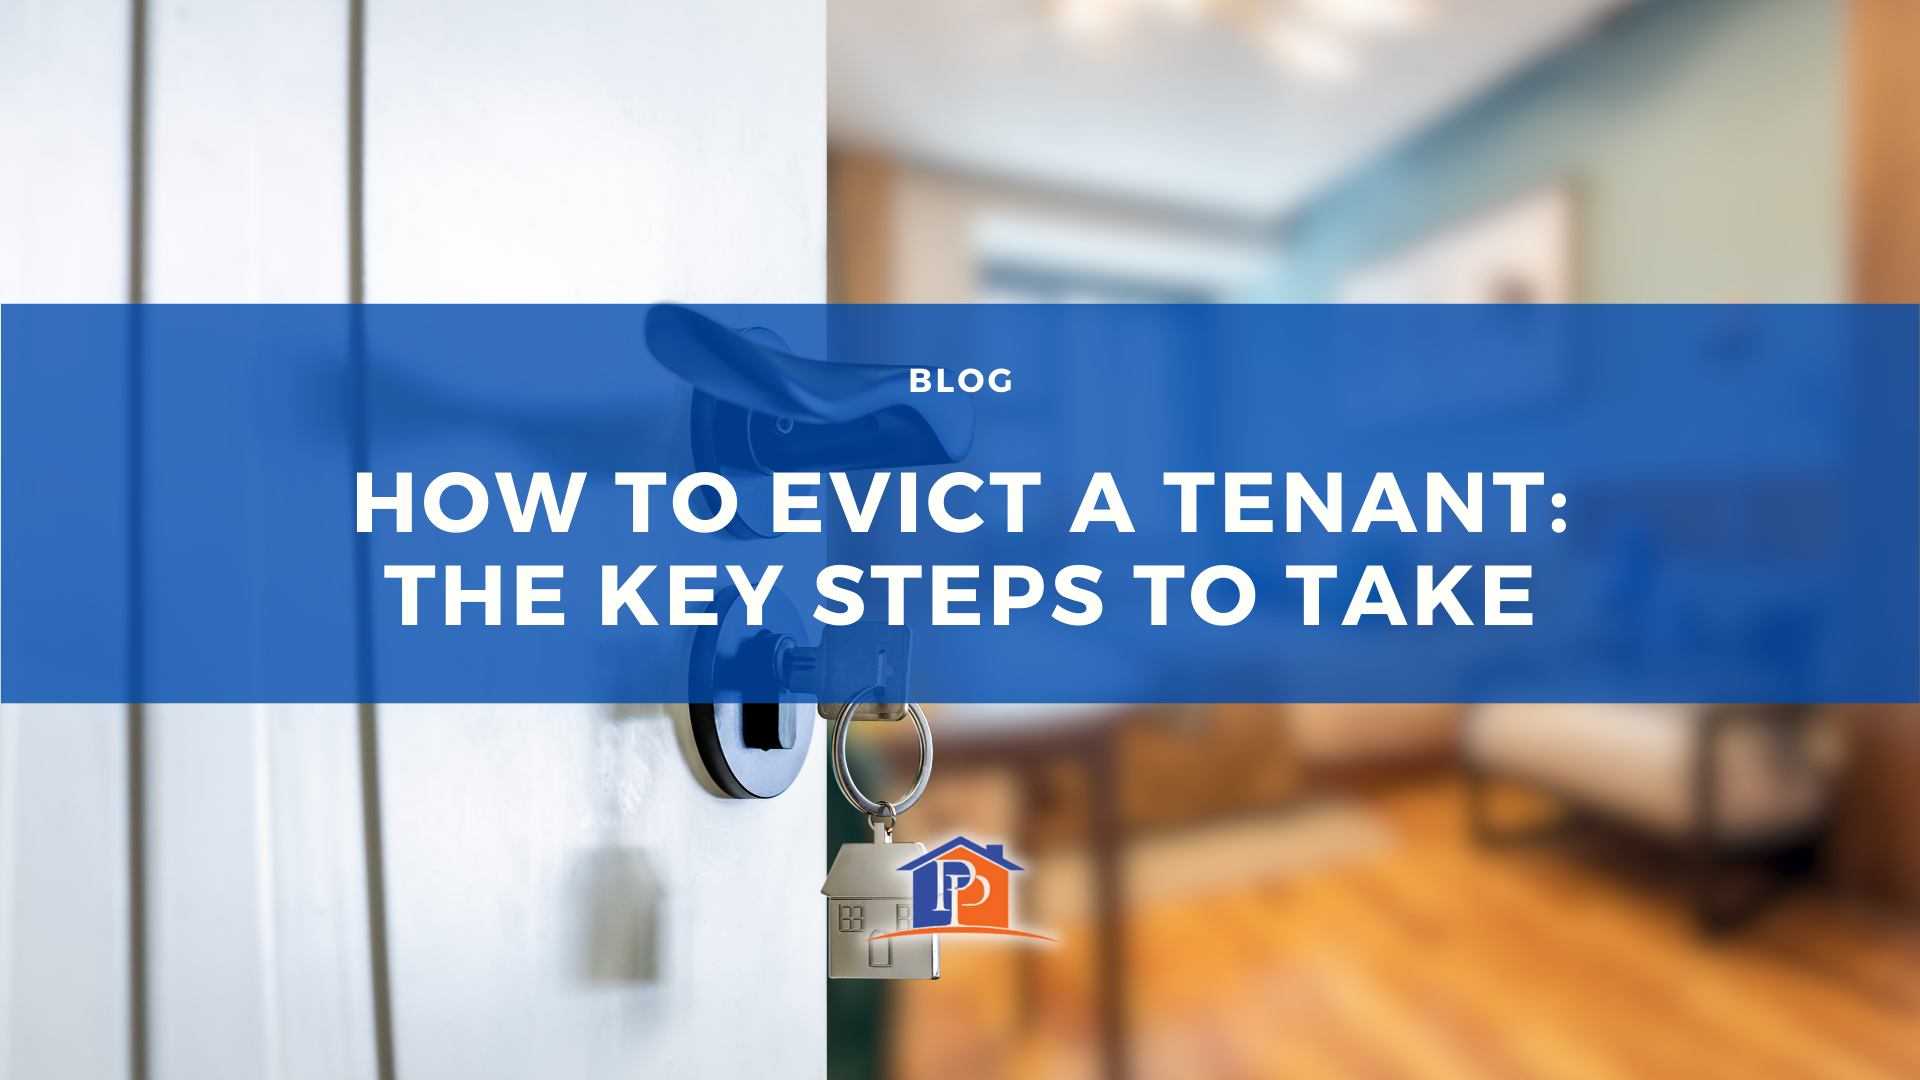 How to Evict a Tenant: The Key Steps to Take